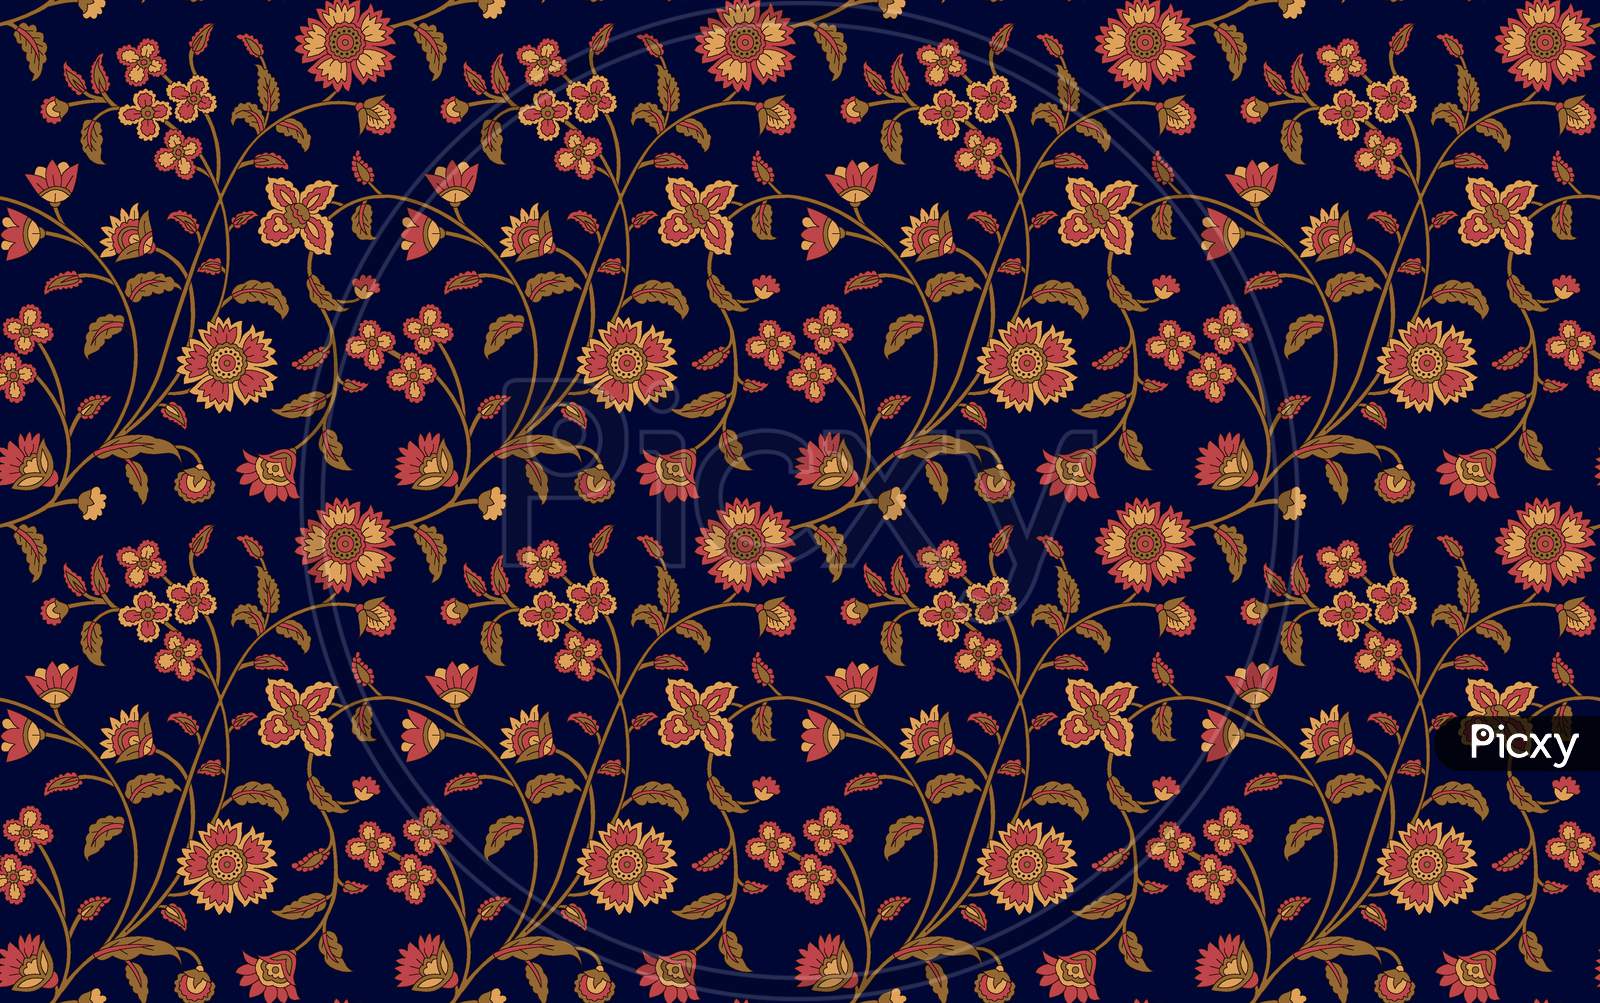 Seamless Beautiful Floral Design Background